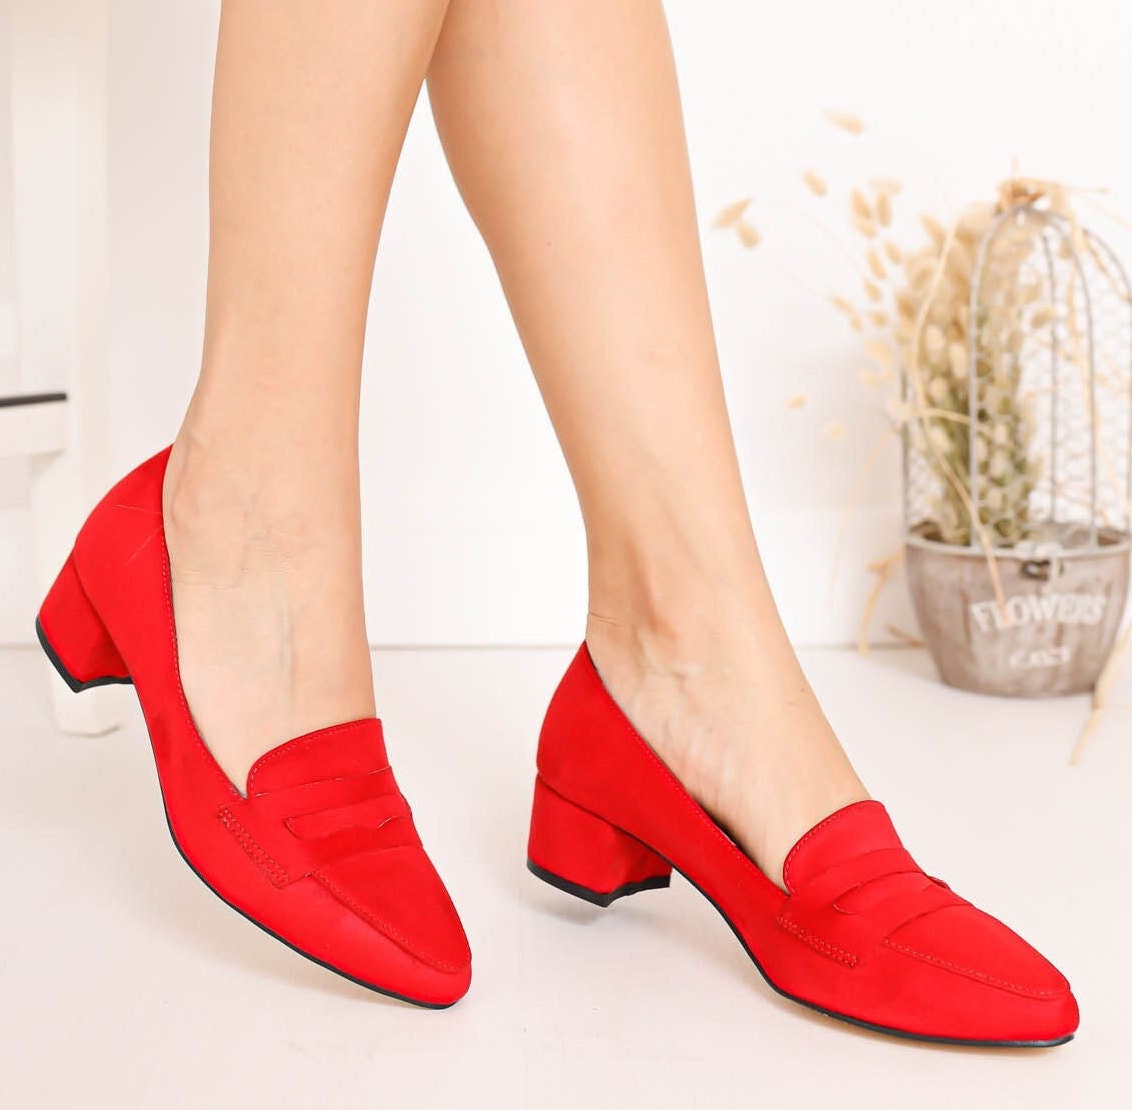 🇲🇾 DESINCE Women Classic Shoes England Style Woman Shoes Round